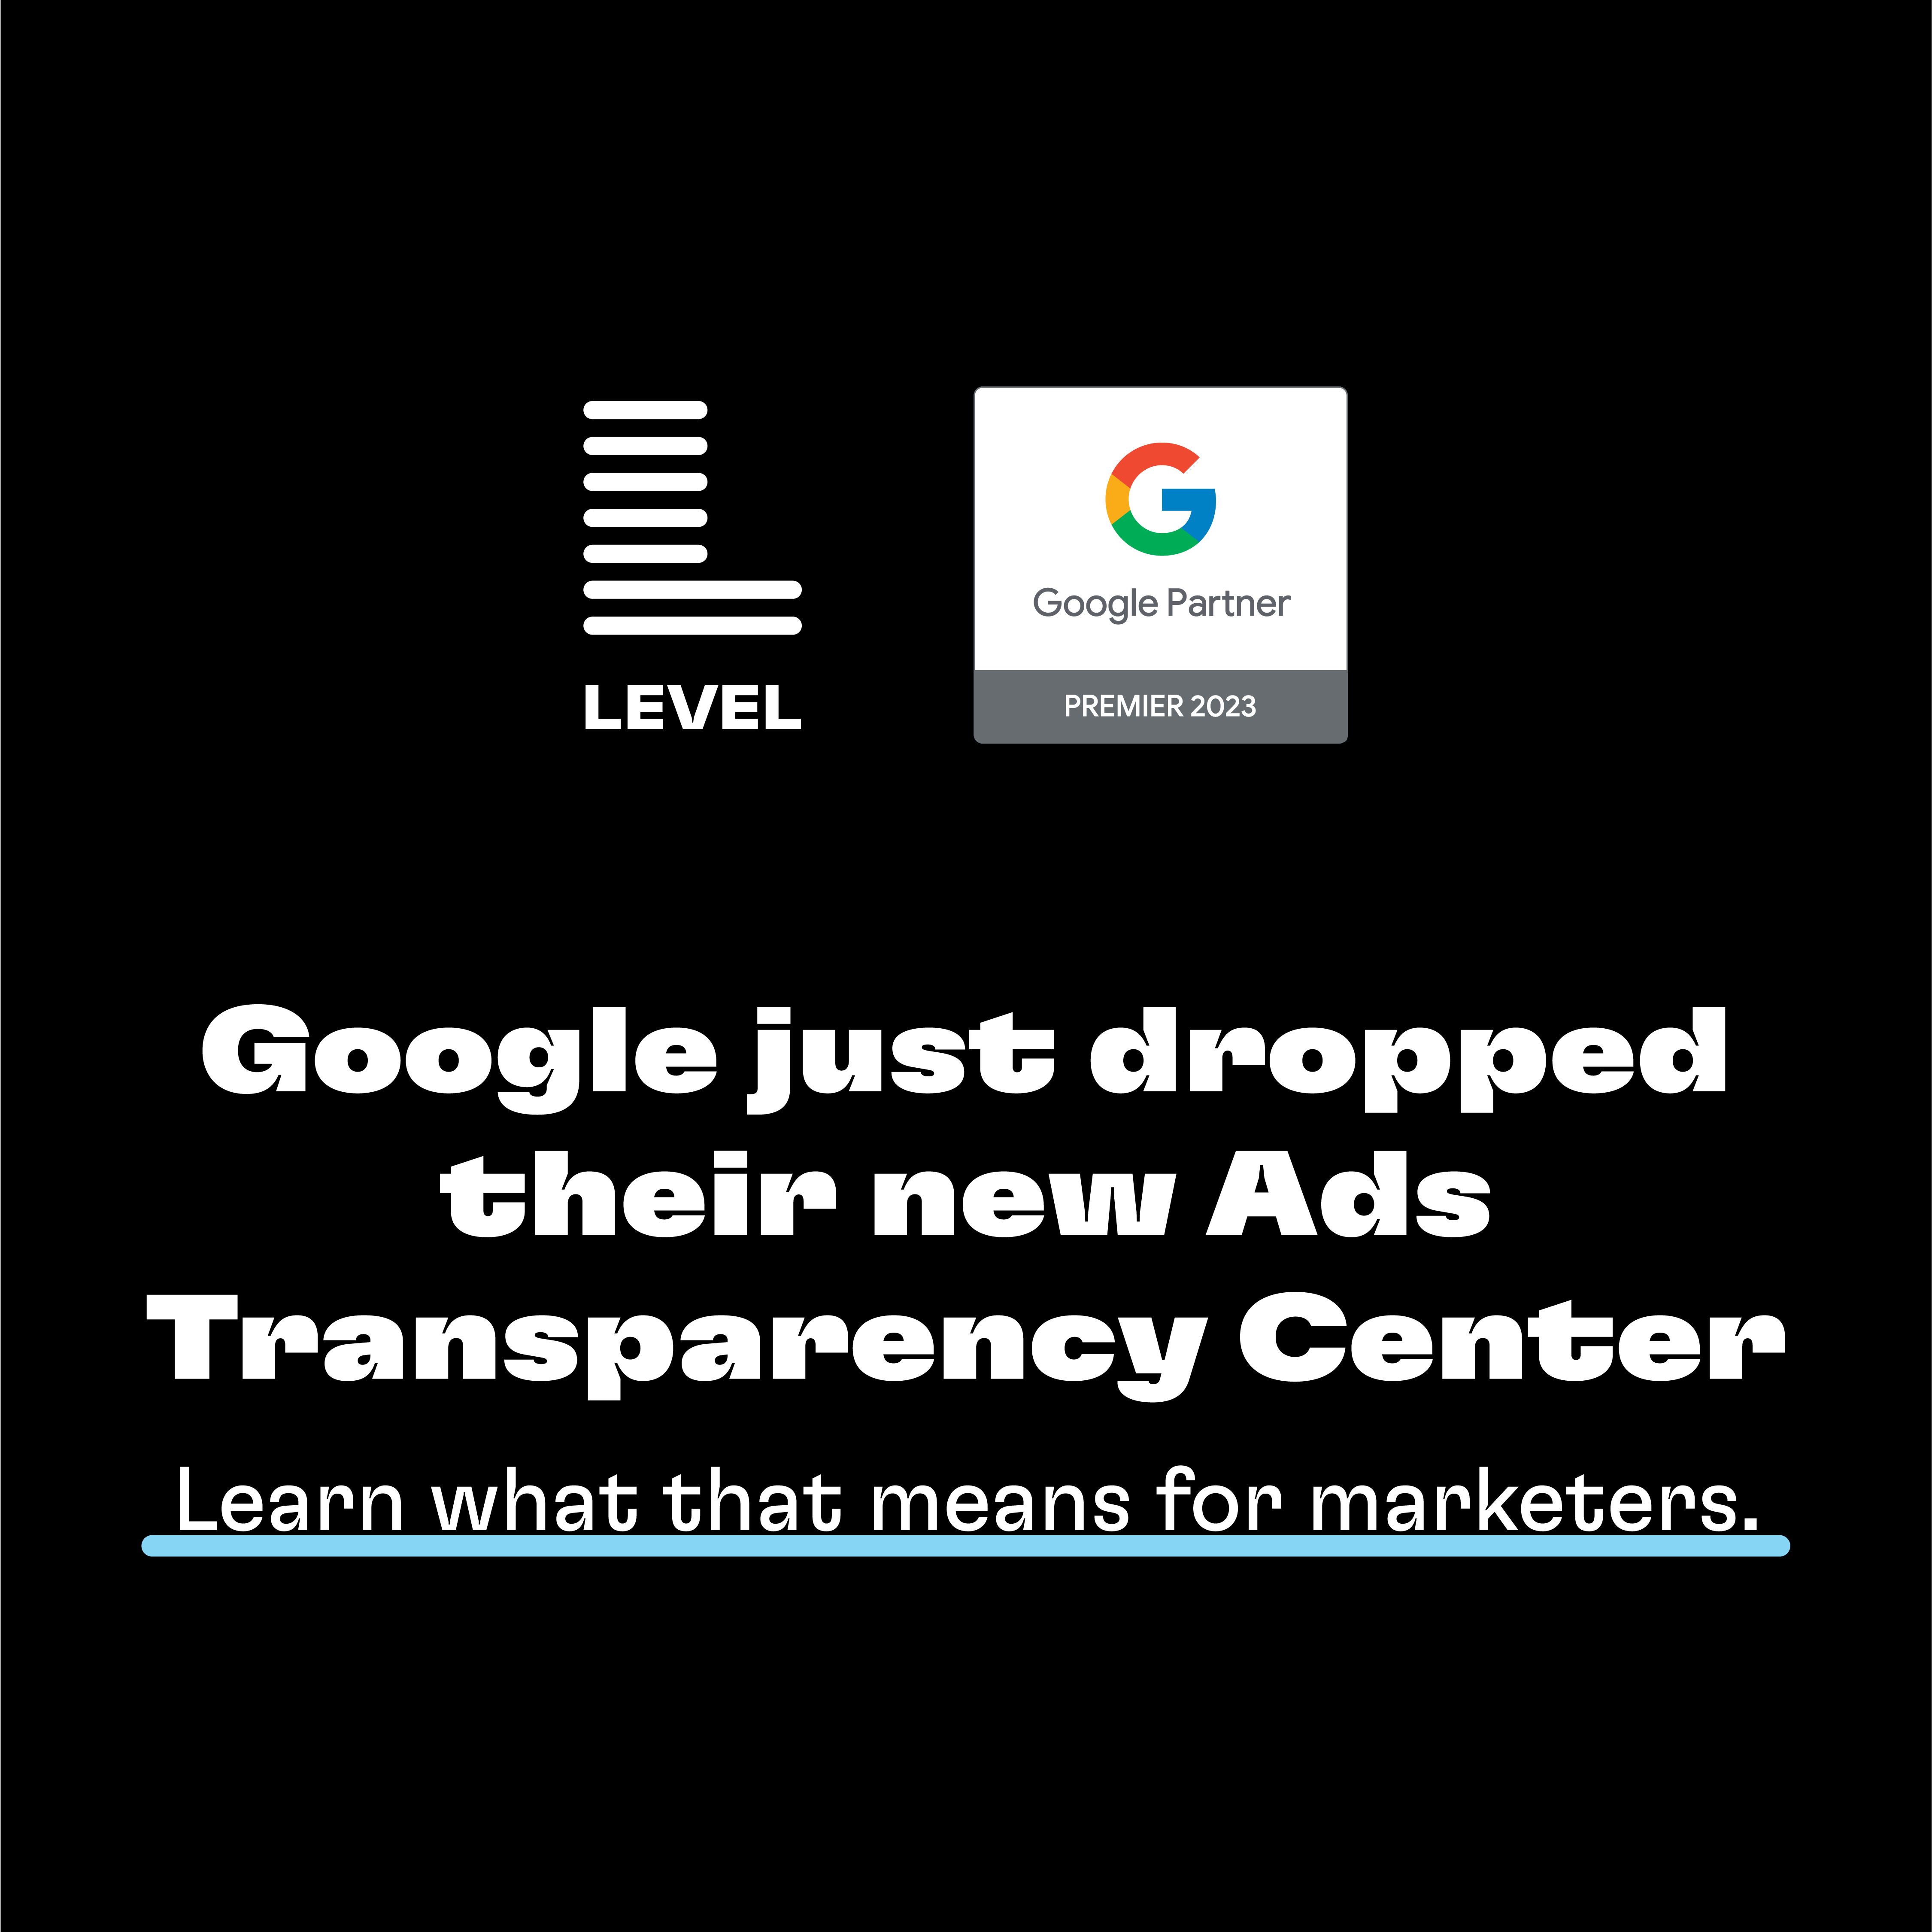 Google just dropped their new Ads Transparency Center. Learn what that means for marketers.